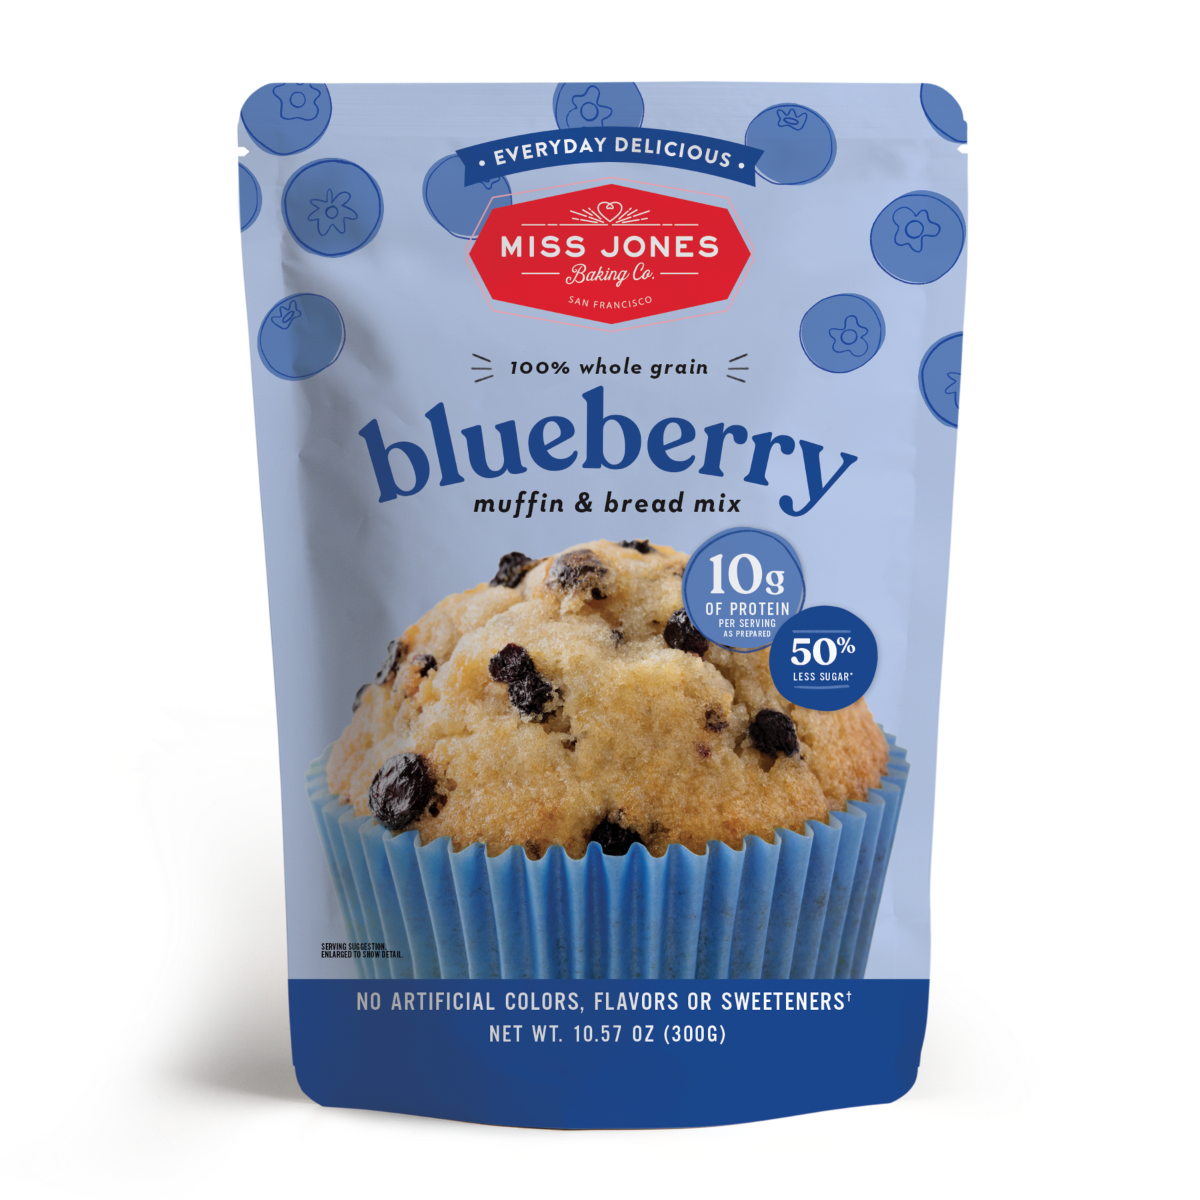 Picture of Miss Jones Baking KHRM00377484 11.54 oz Everyday Delicious Blueberry Muffin & Bread Mix